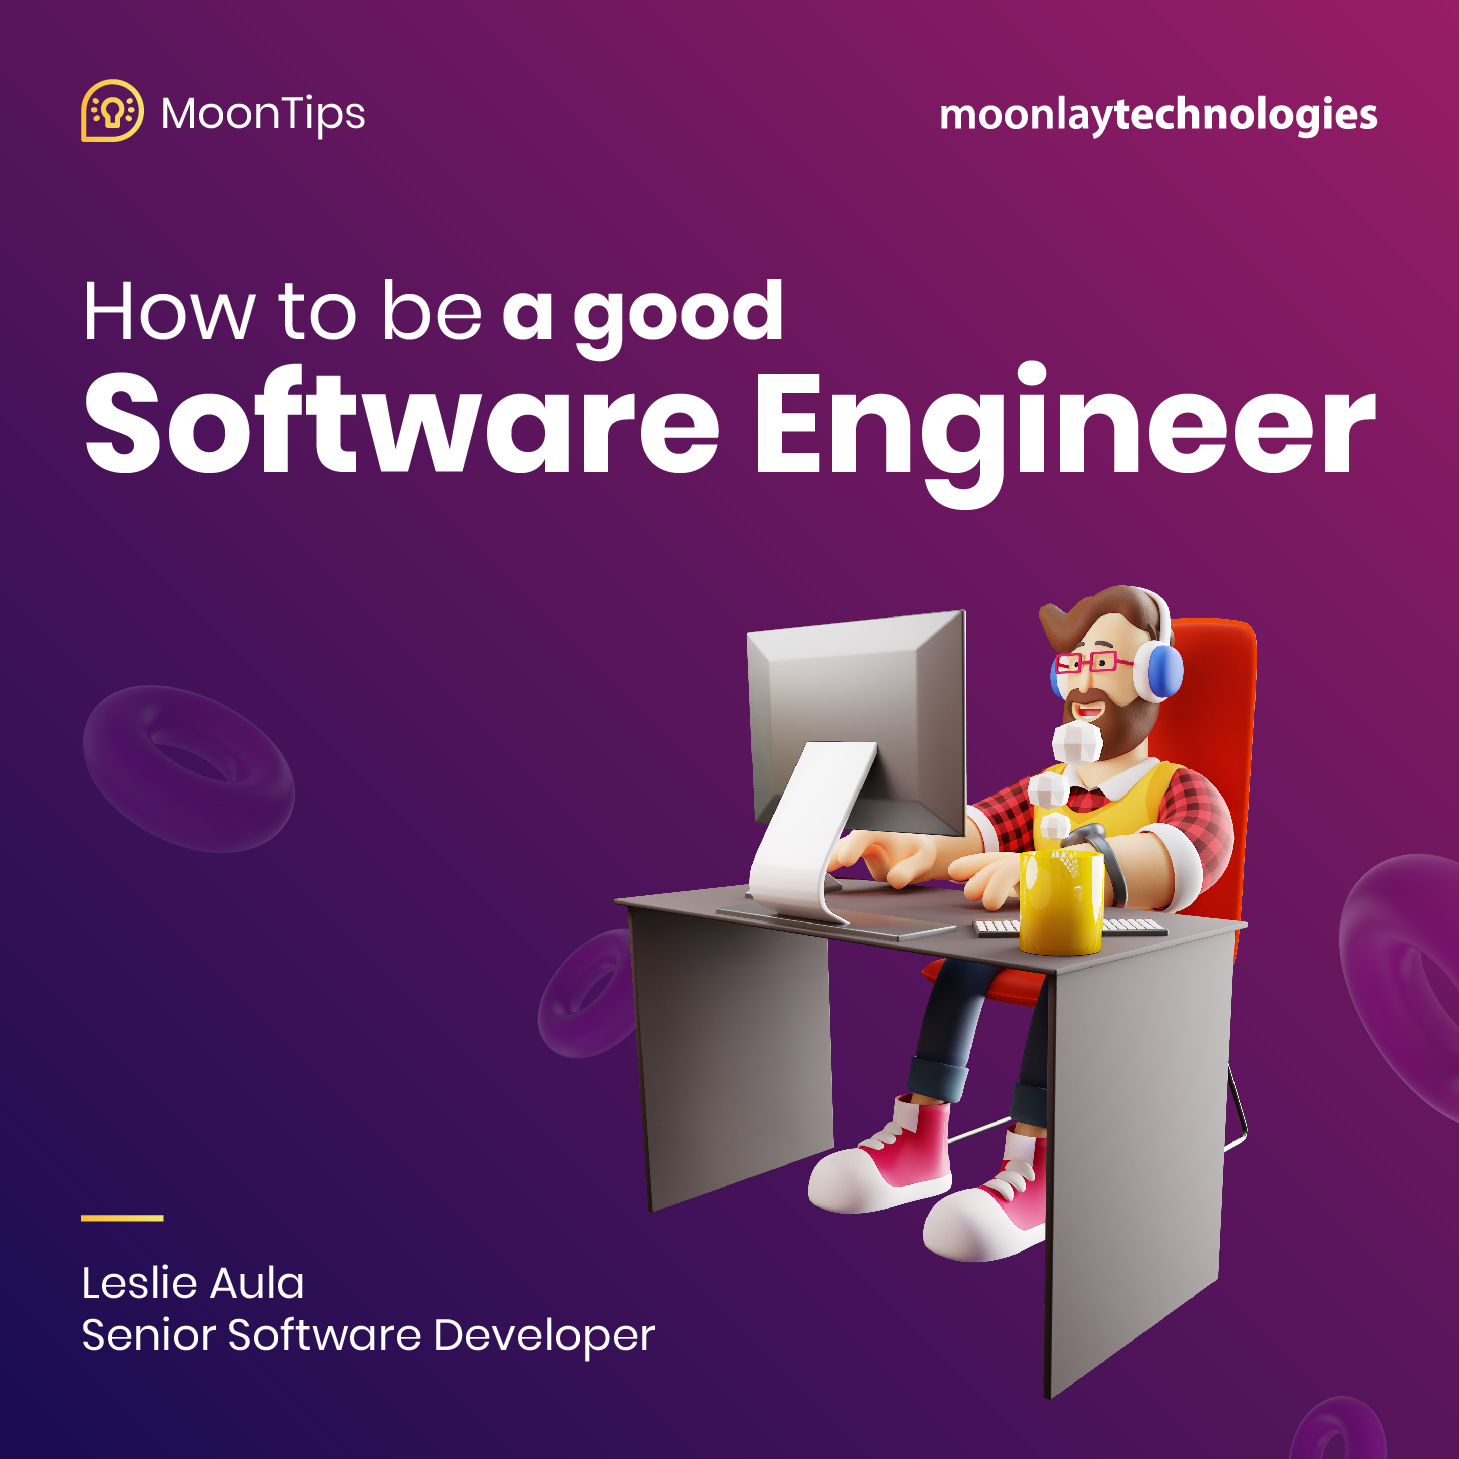 How to be a Good Software Engineer?